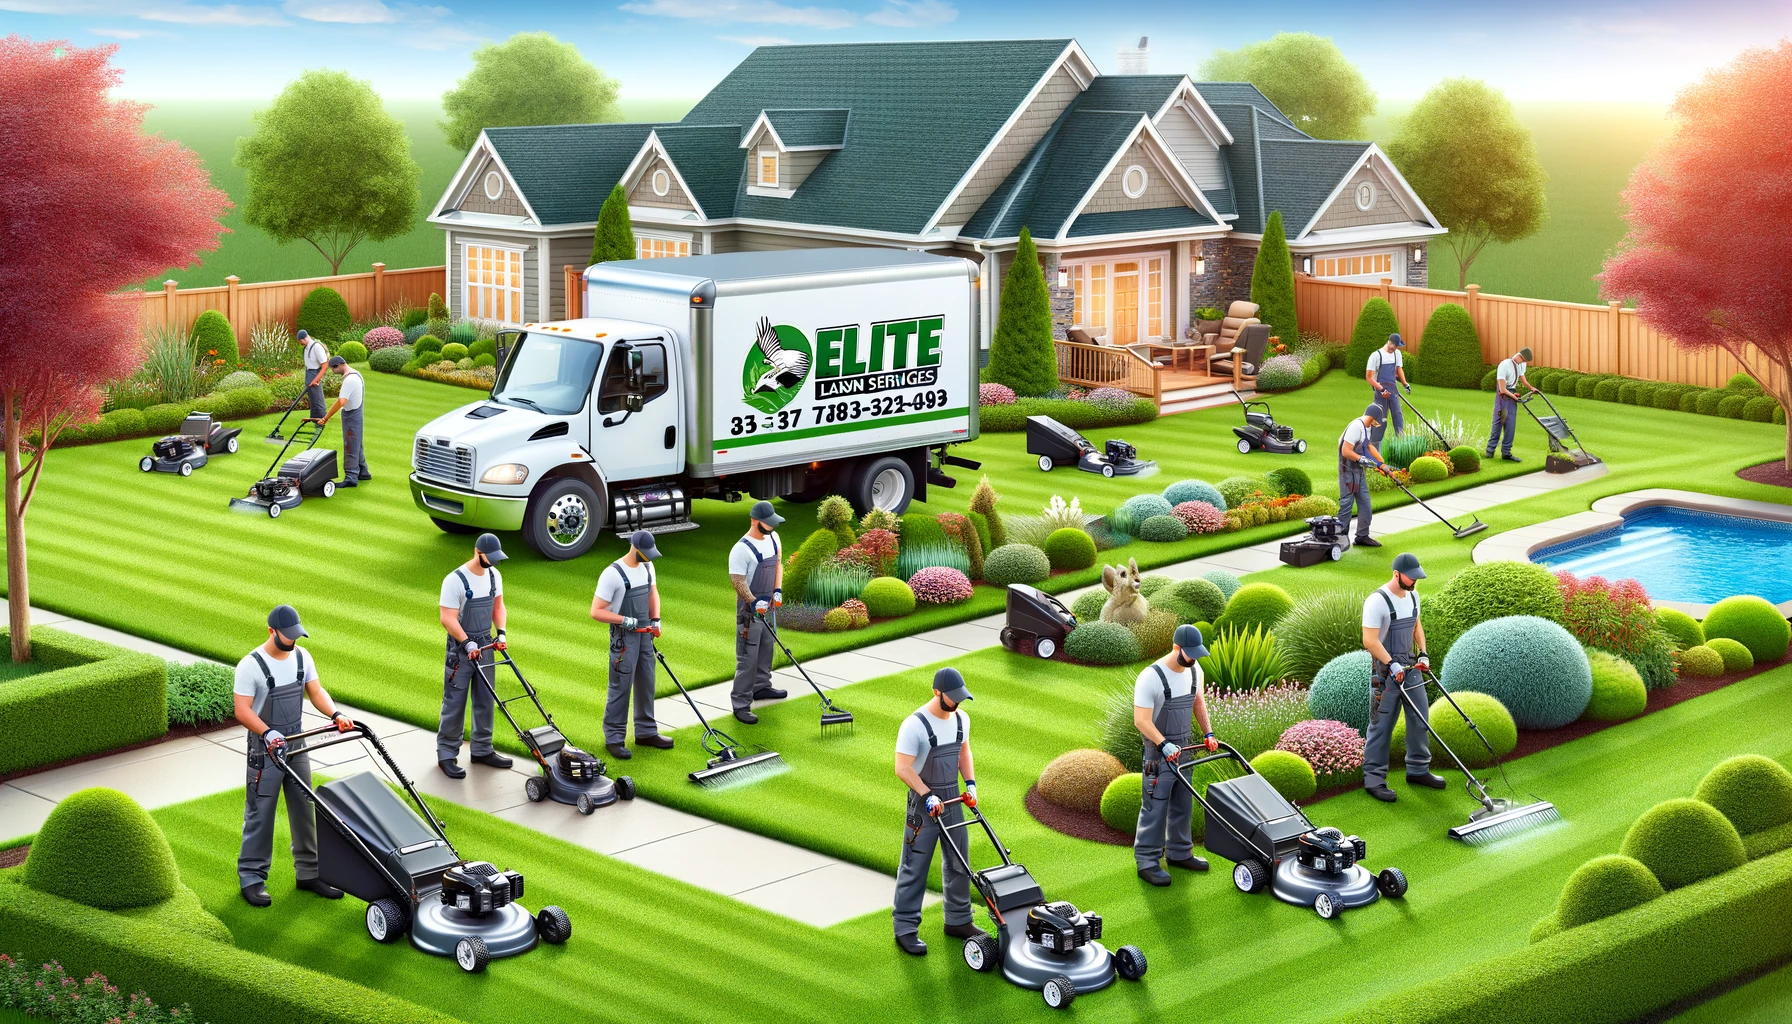 Lawn mowing company names